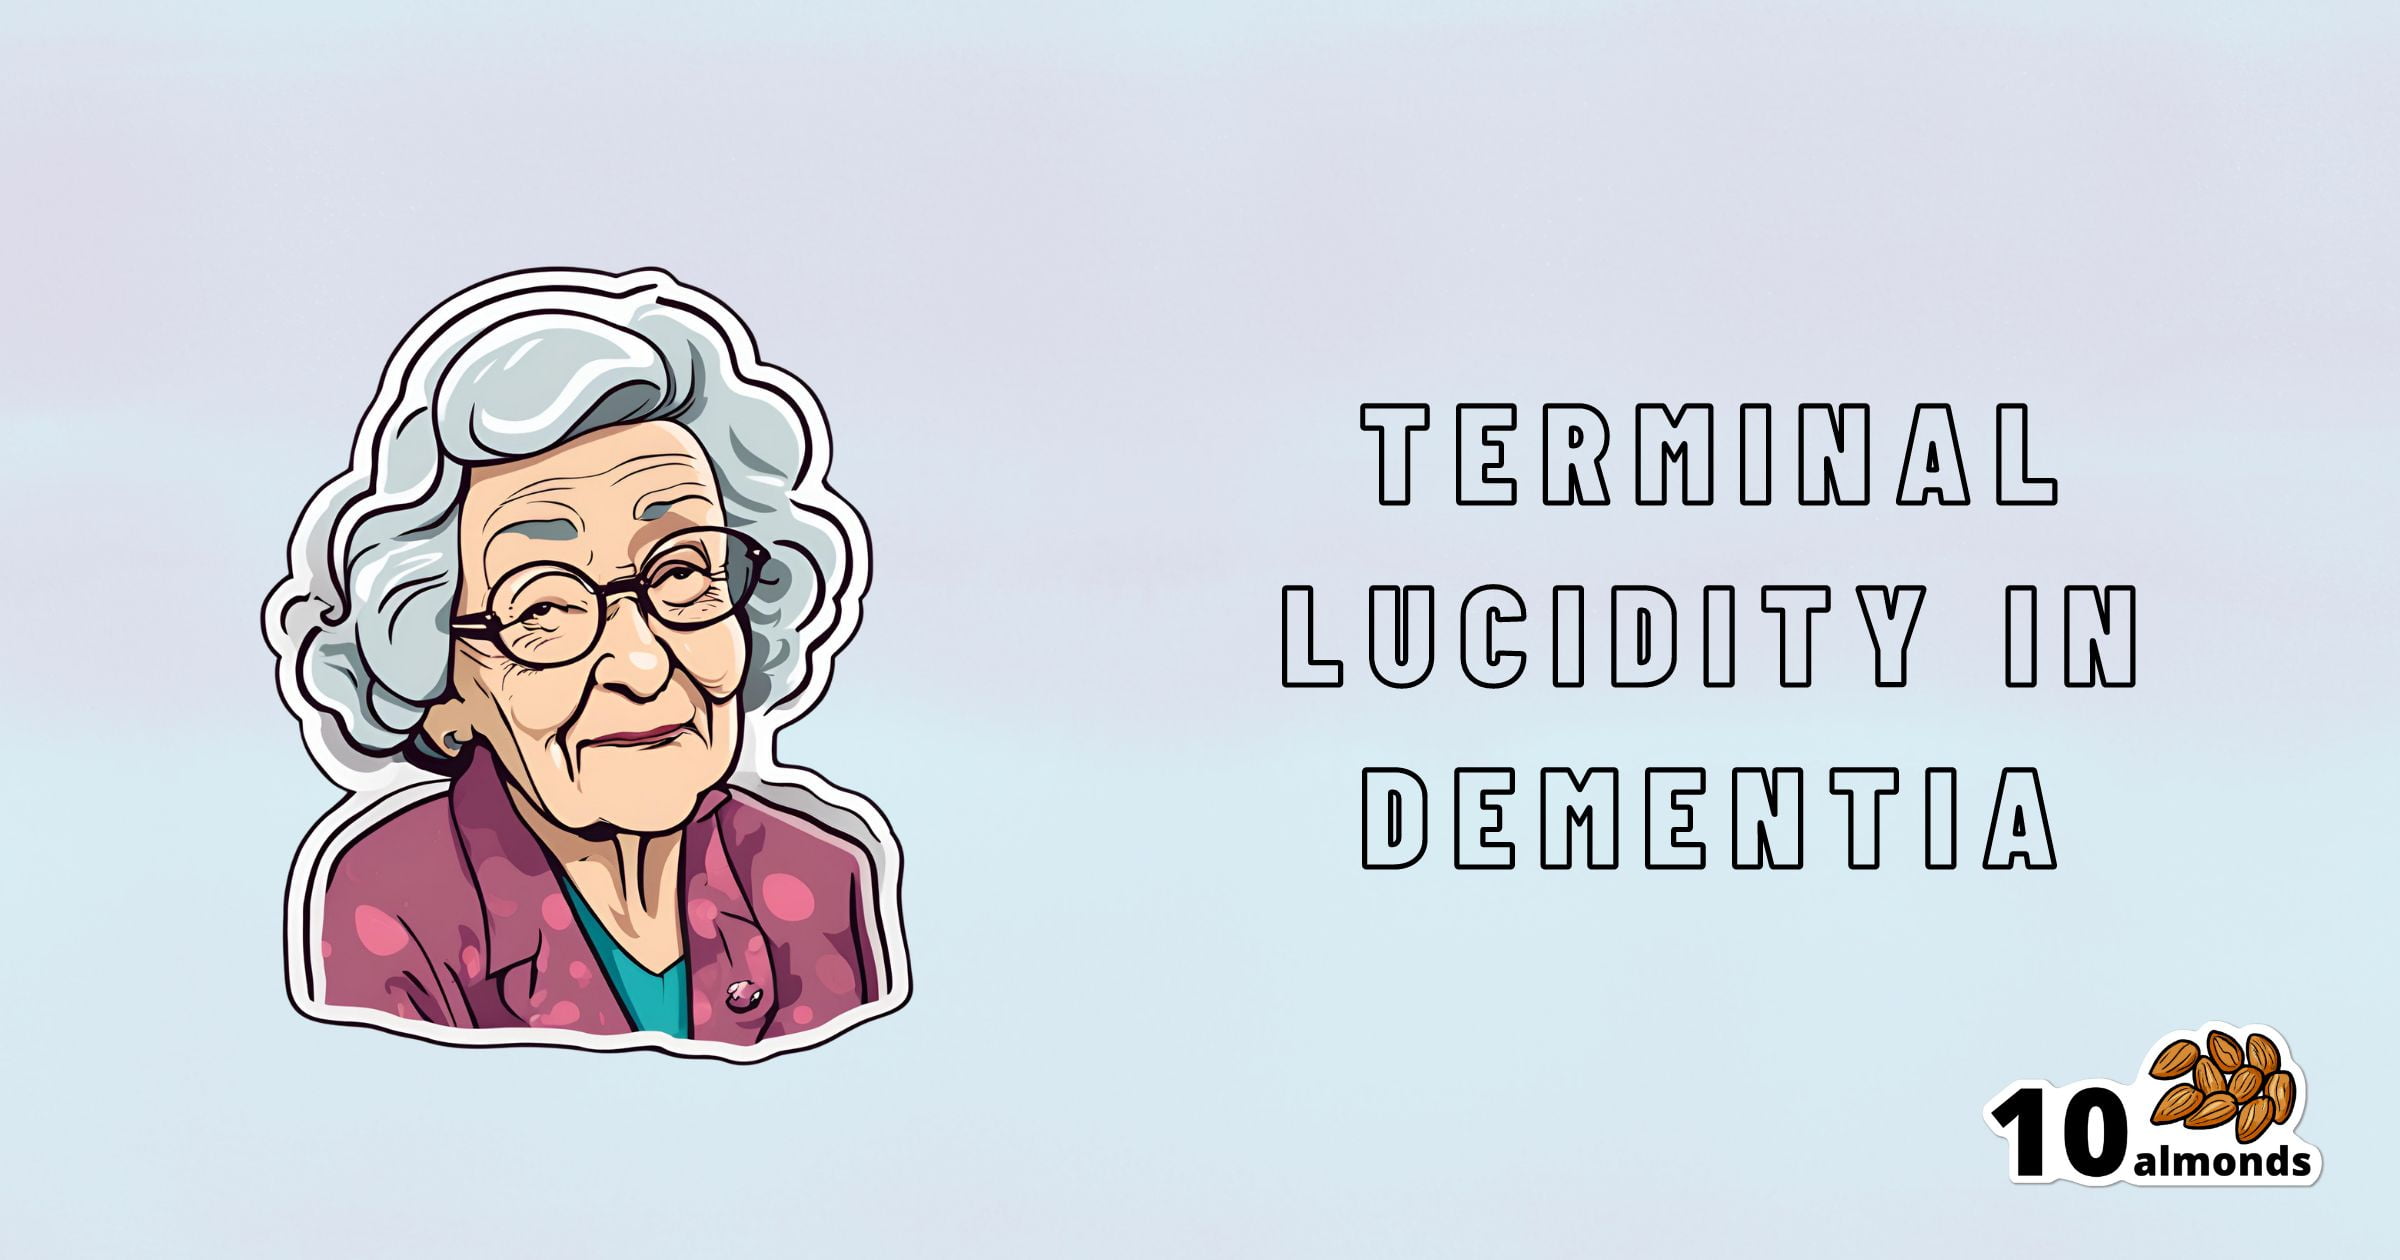 Illustration of an elderly woman wearing glasses and a purple outfit. The text next to her reads, "Terminal Lucidity in Dementia Before Death." In the bottom right corner, the logo "10 almonds" with an image of almonds is displayed.